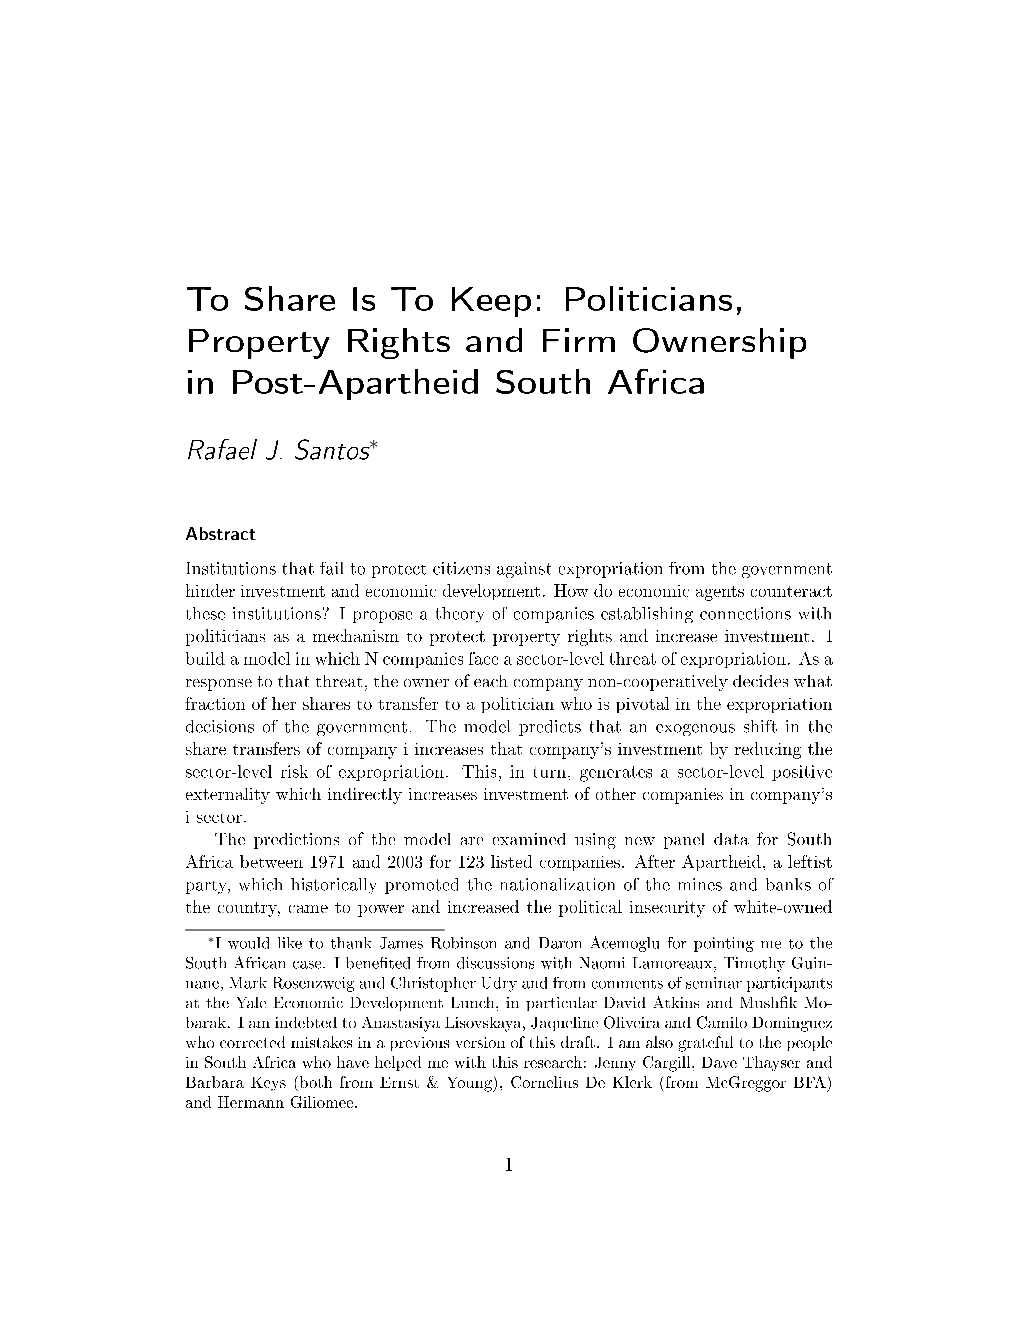 Politicians, Property Rights and Firm Ownership in Post-Apartheid South Africa